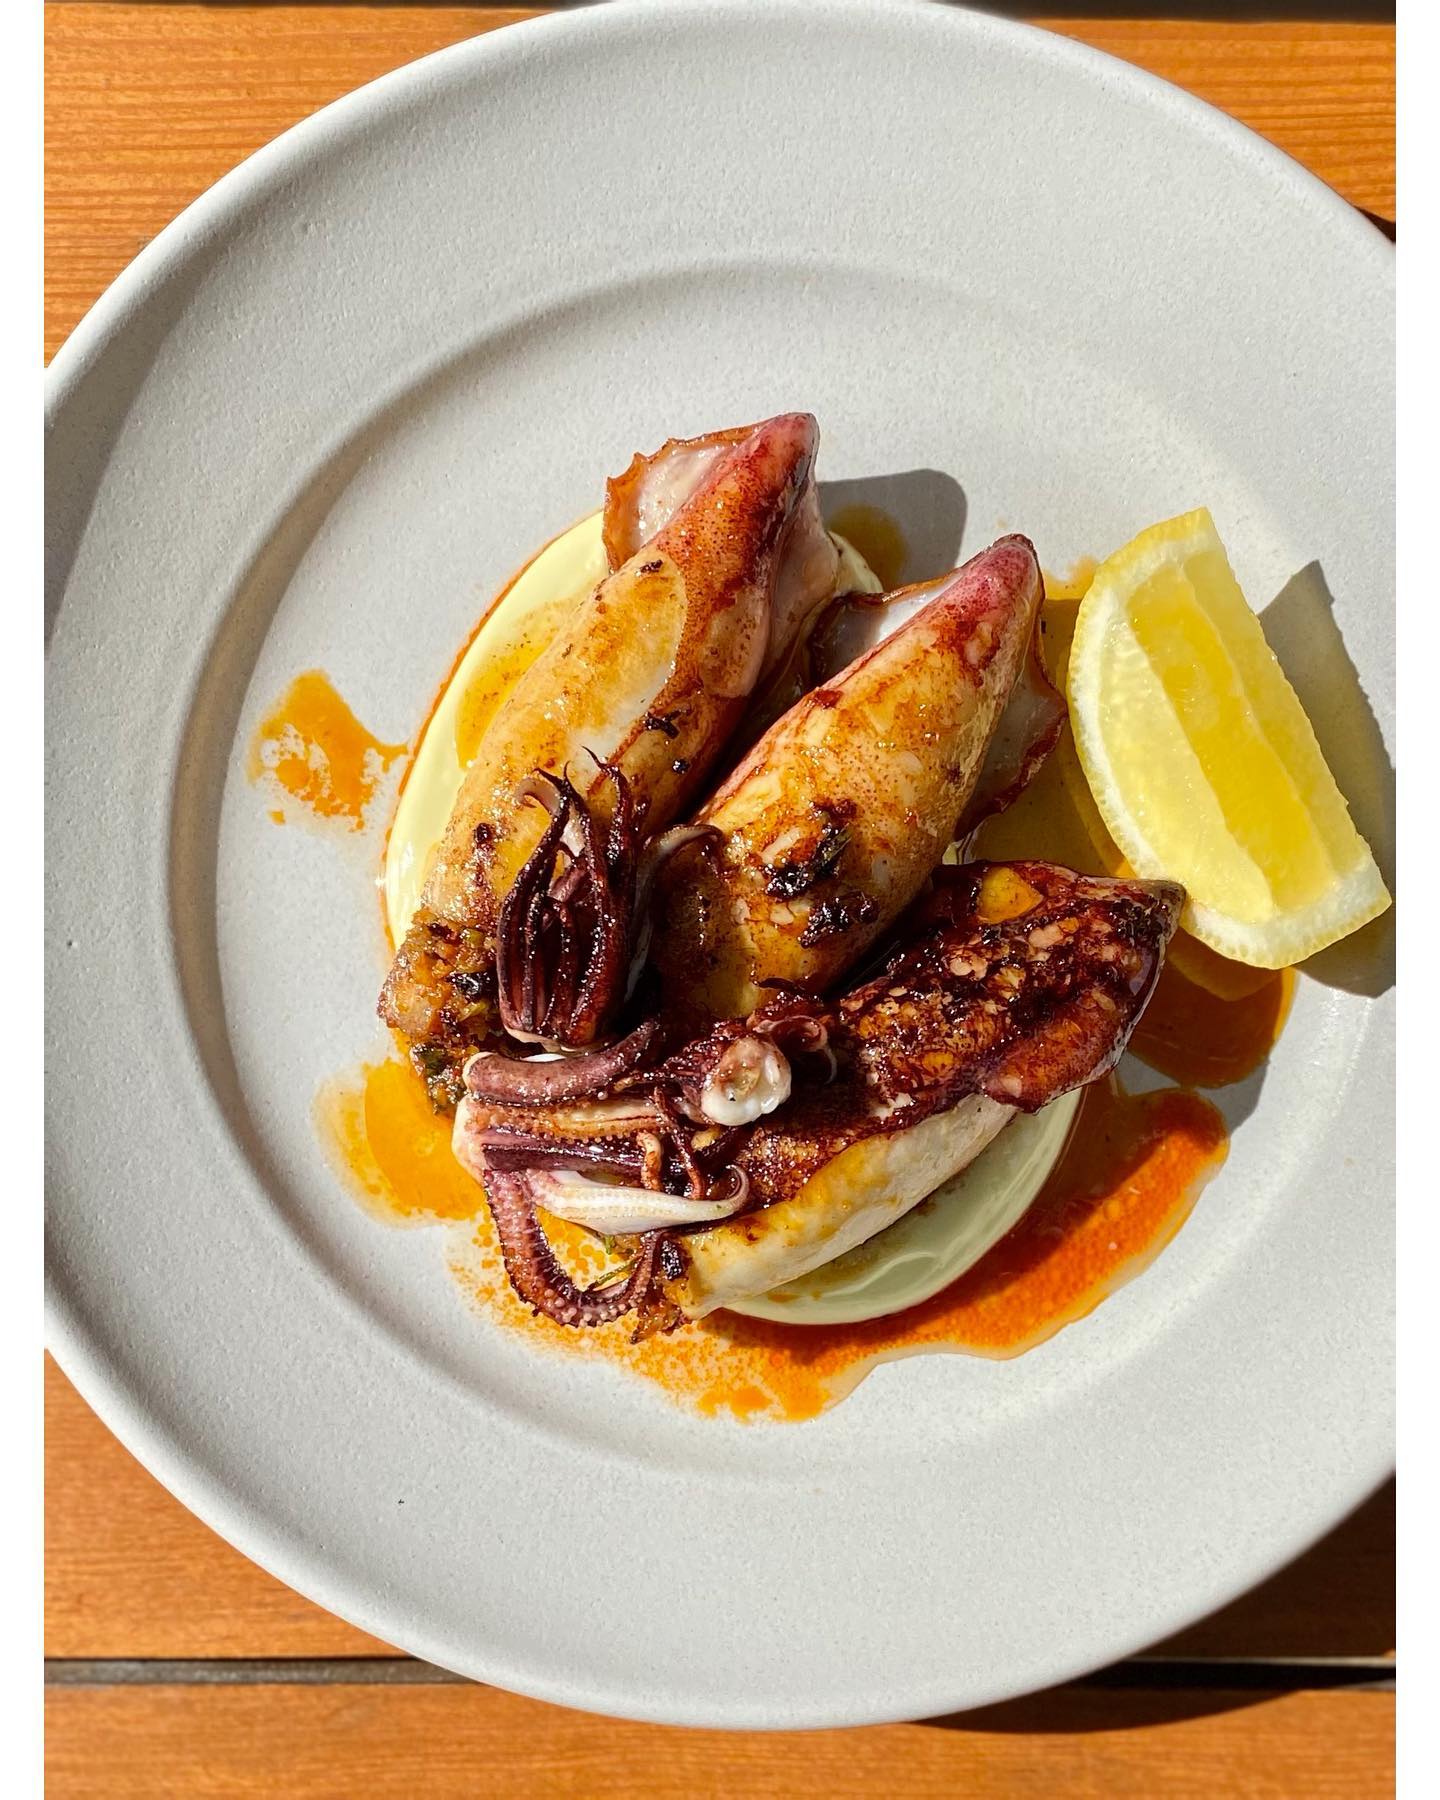 Squid cooked with oil and lemon